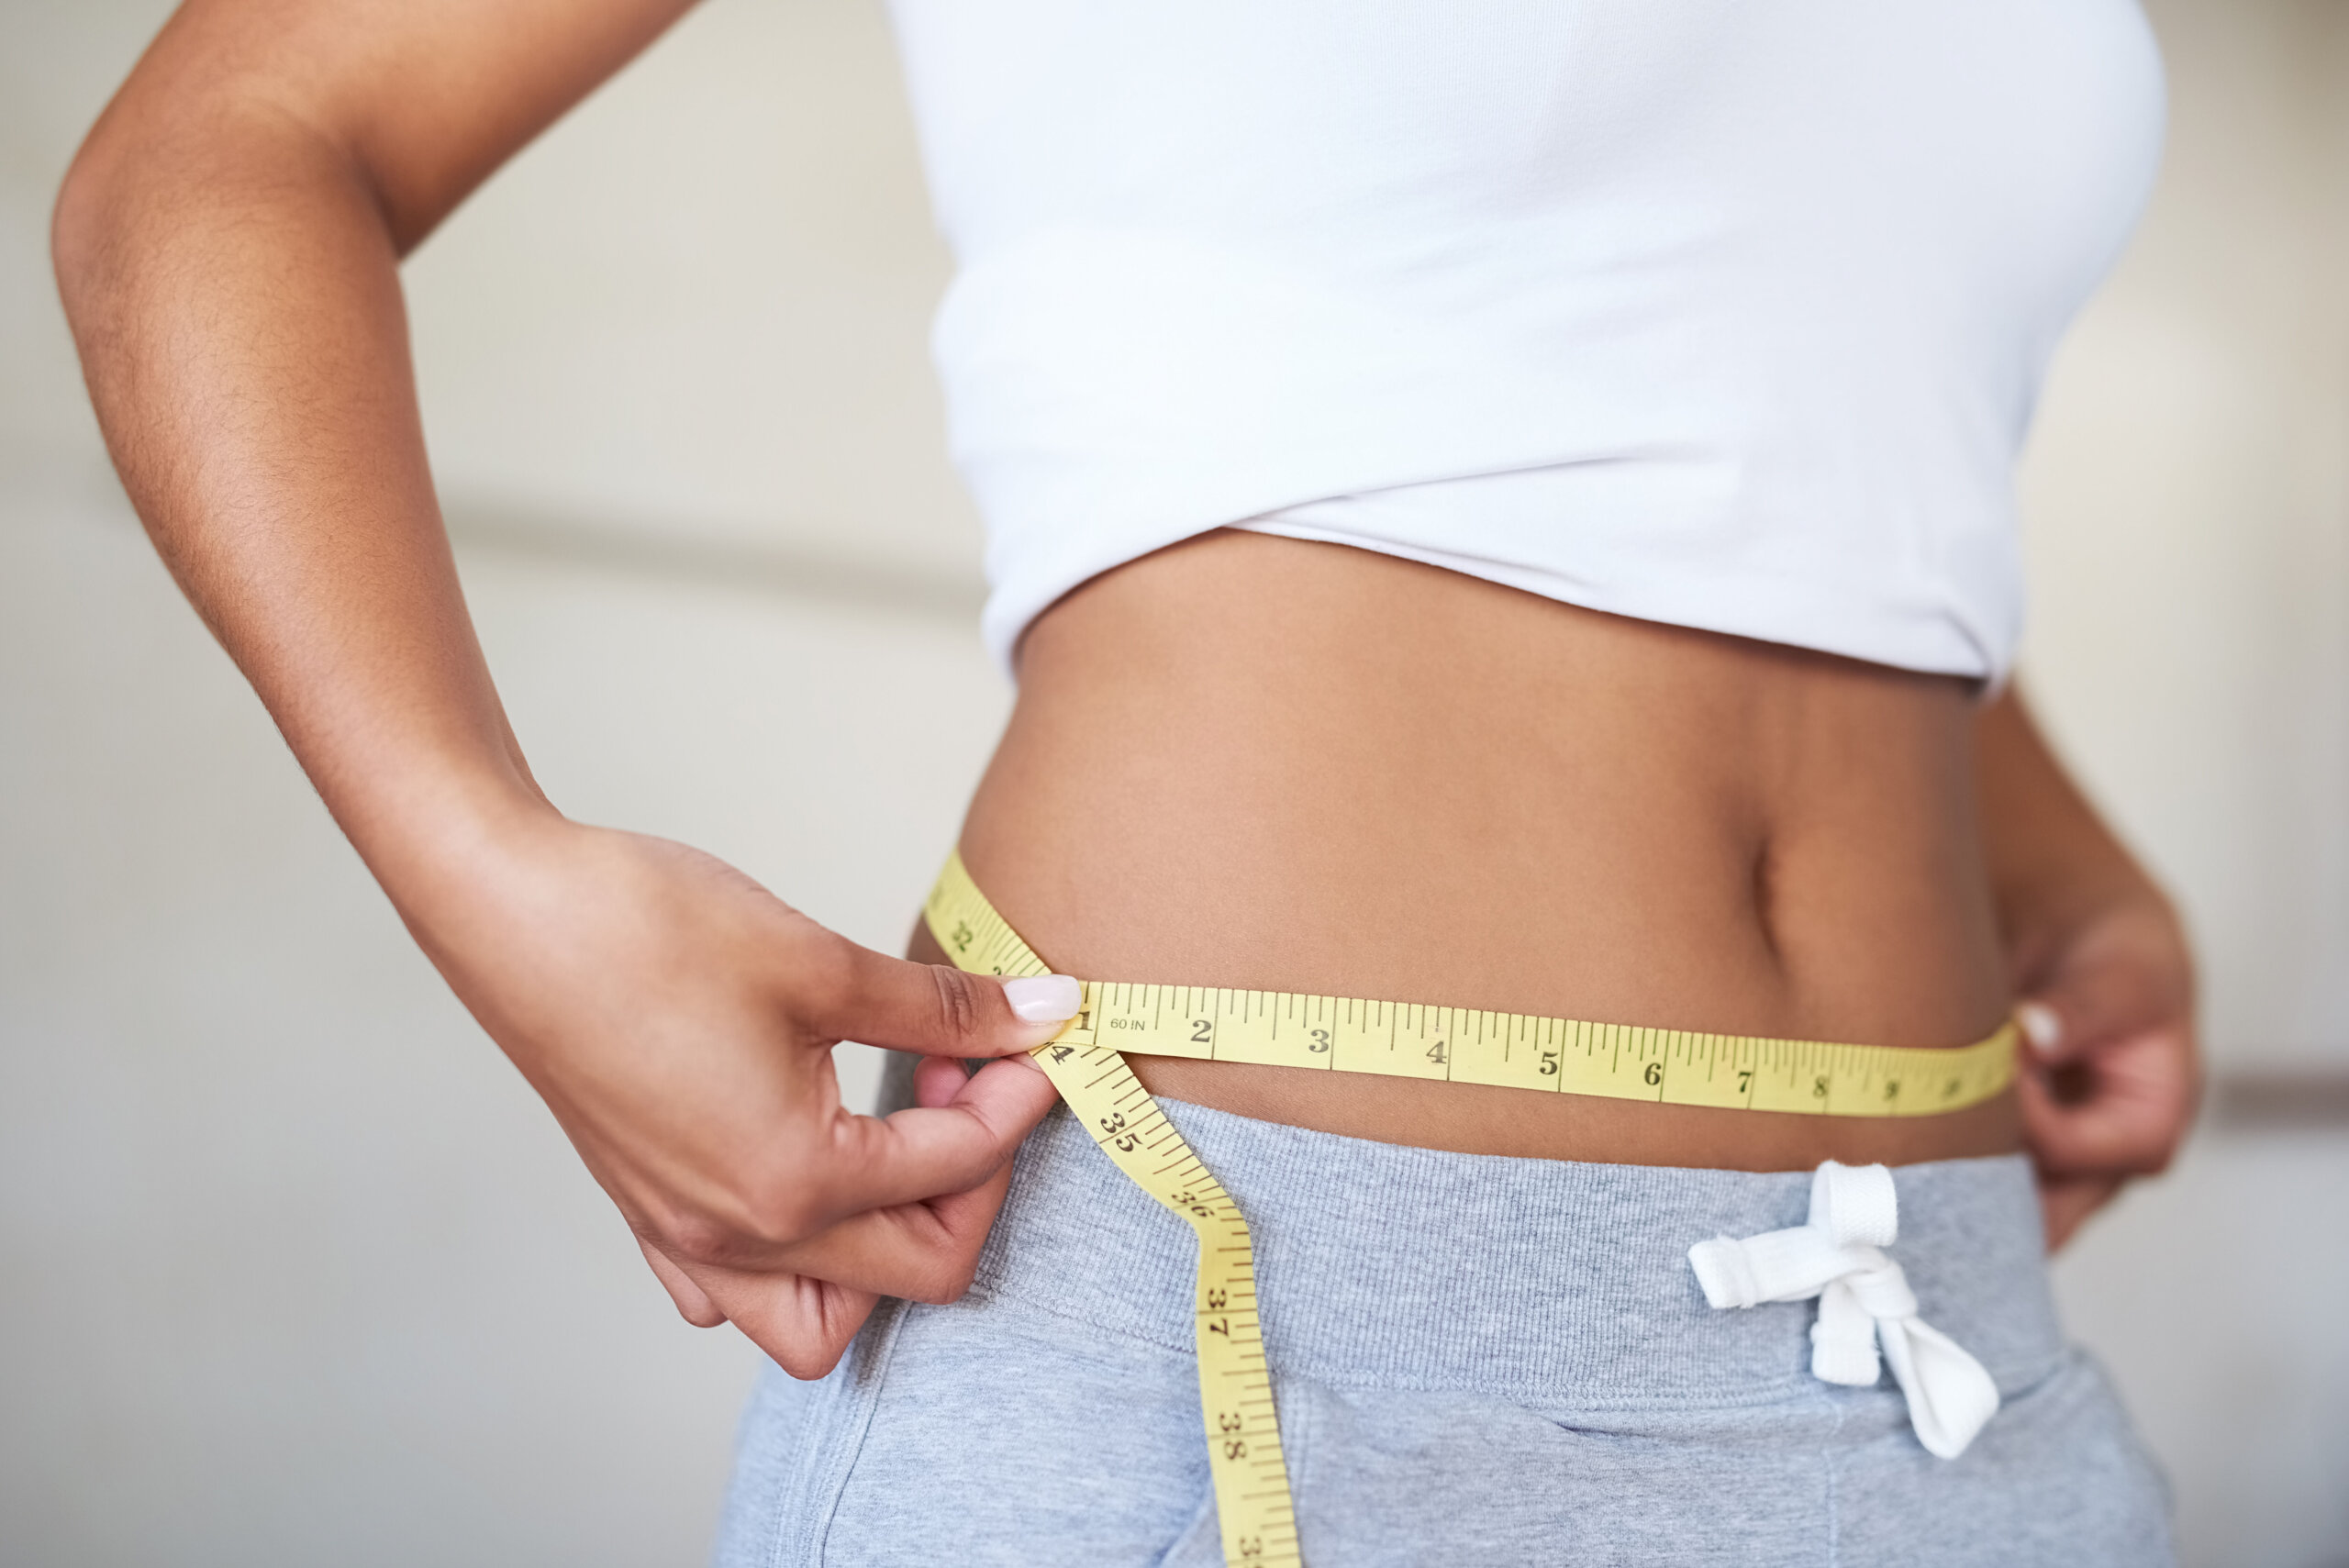 How to Lose Belly Fat the Healthy Way